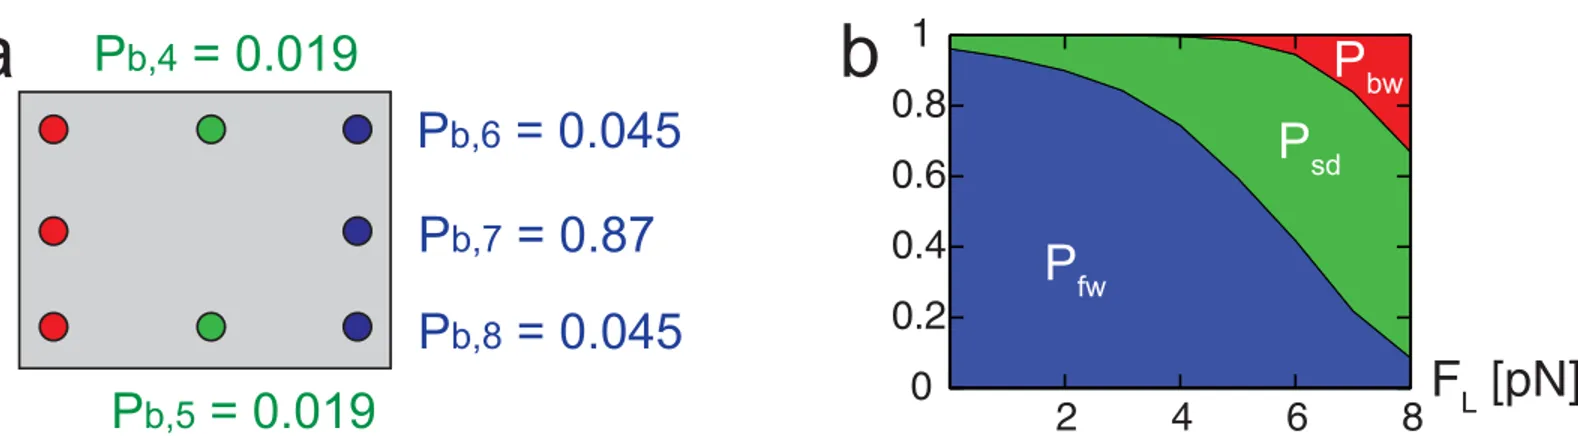 Fig 6. Probability of binding at neighboring sites. The numbers in (a) denote the probability to bind (P b, i ) at each site in the absence of external loads.